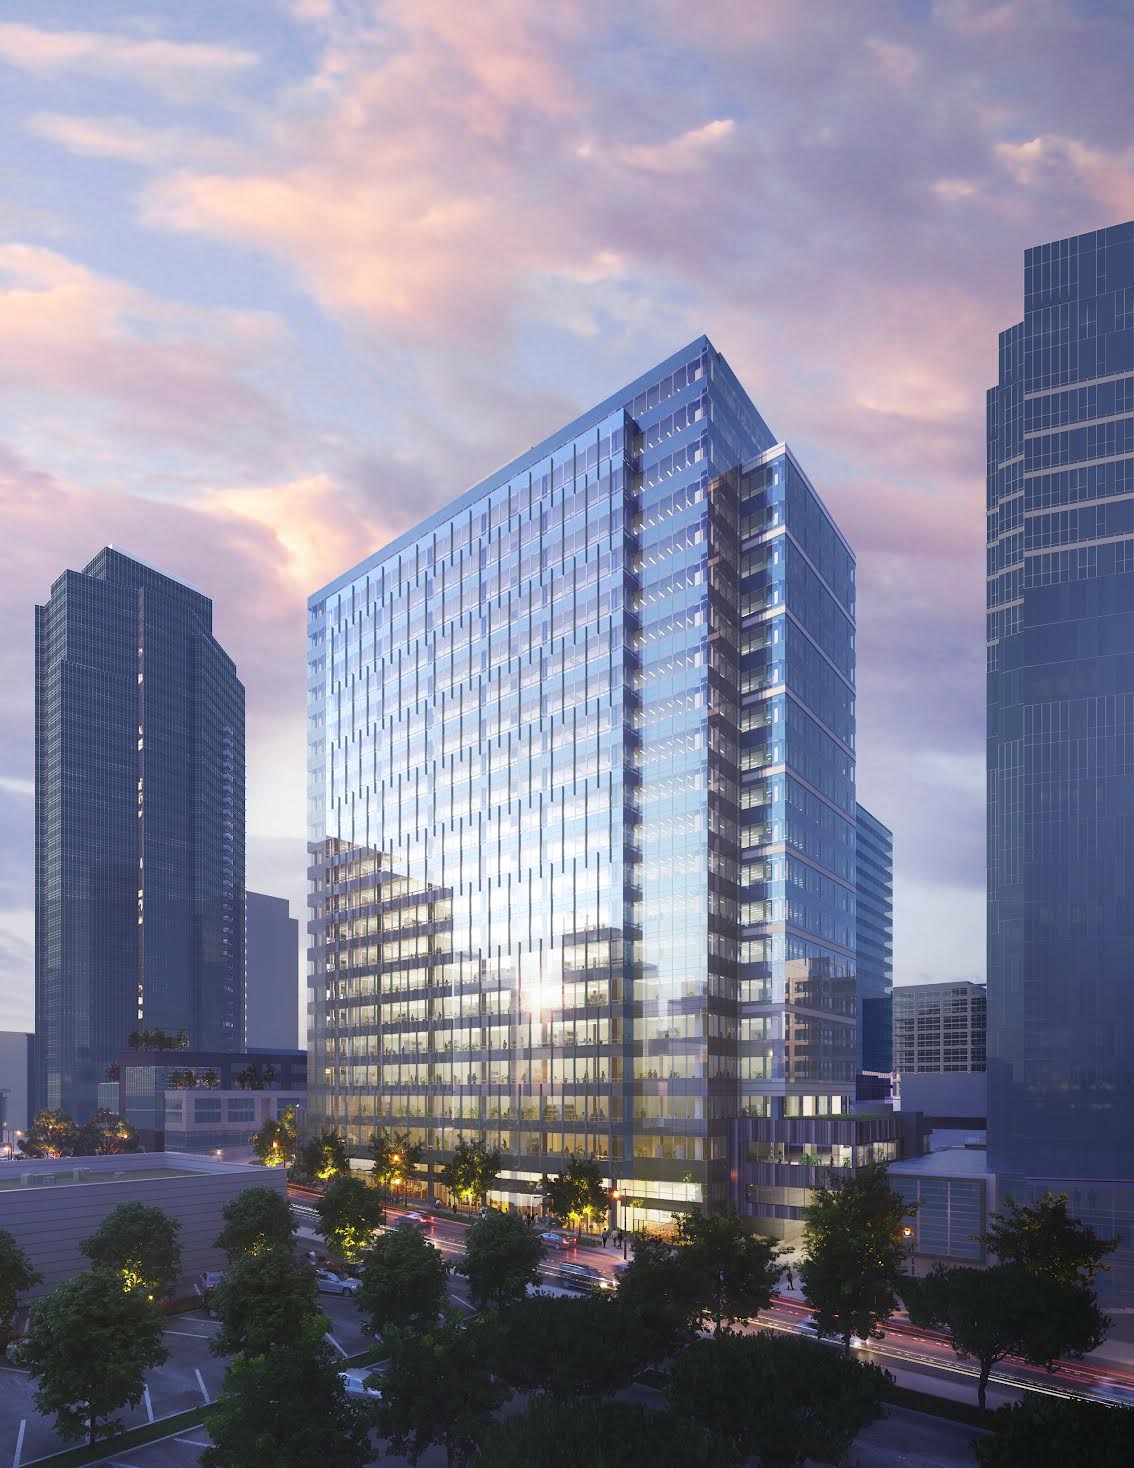 Construction Begins on 21-Story Office Building in Bellevue